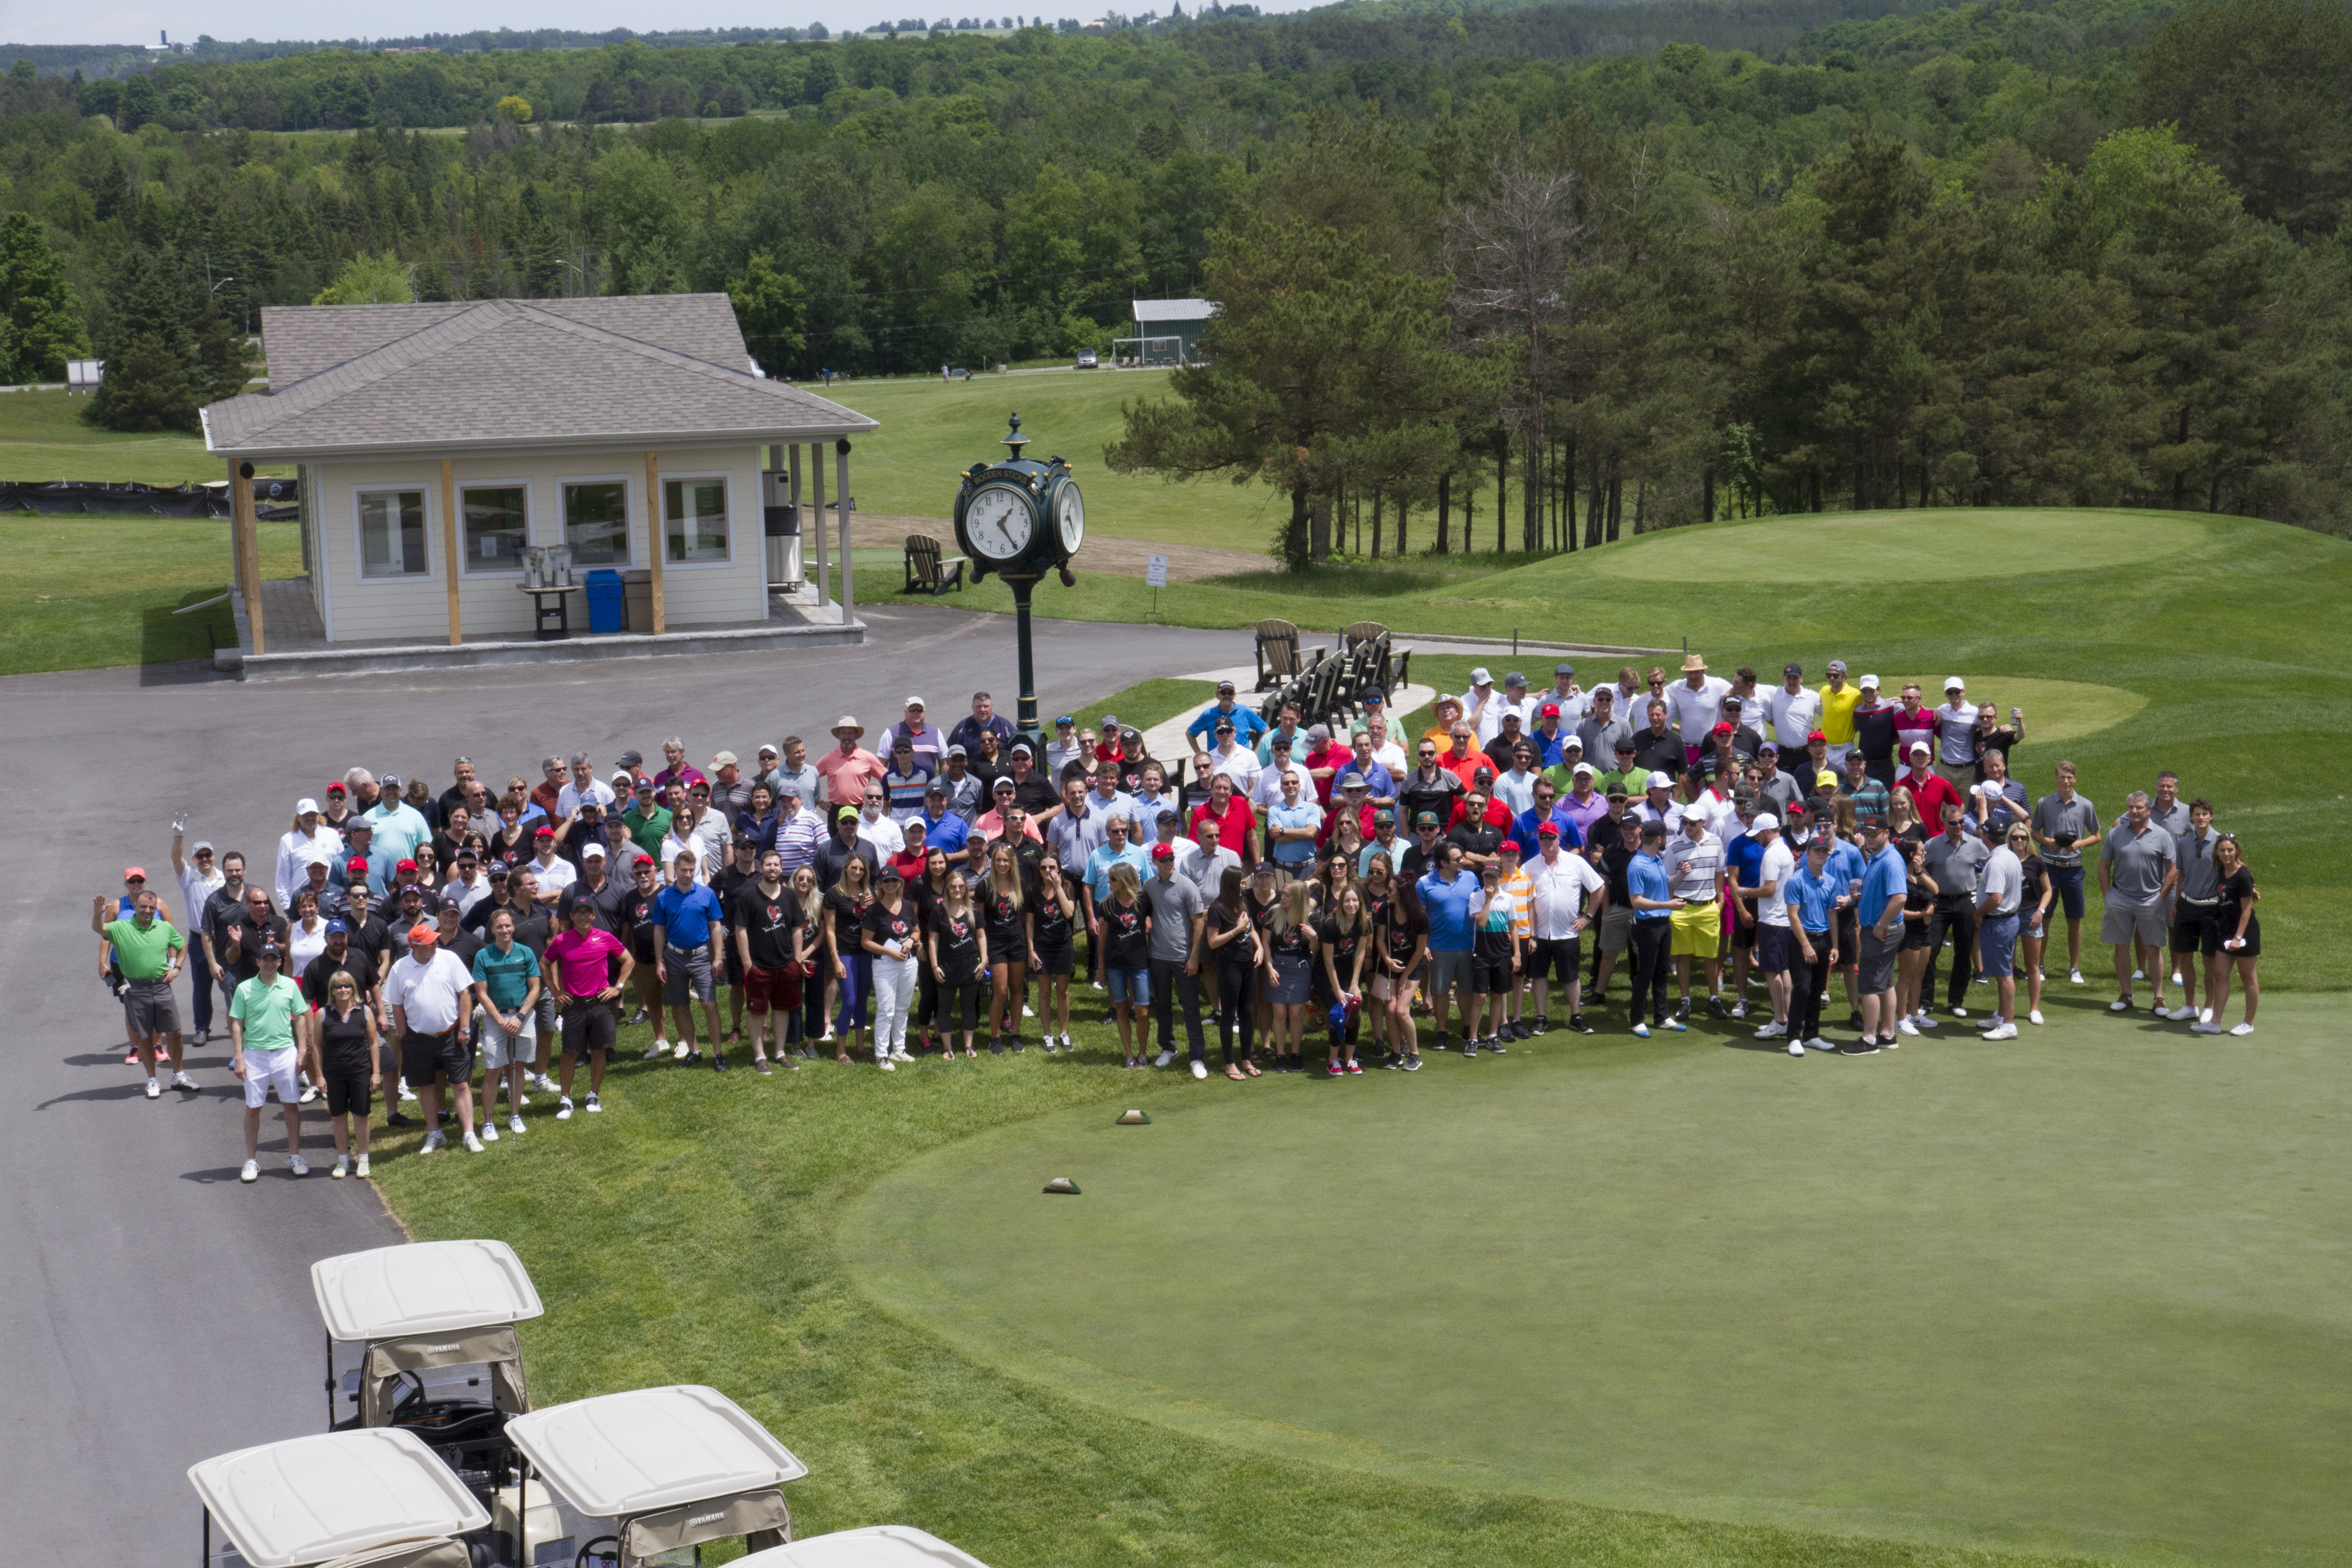 4th Annual Cam's Kids Golf Tournament - Our Best Event Yet!